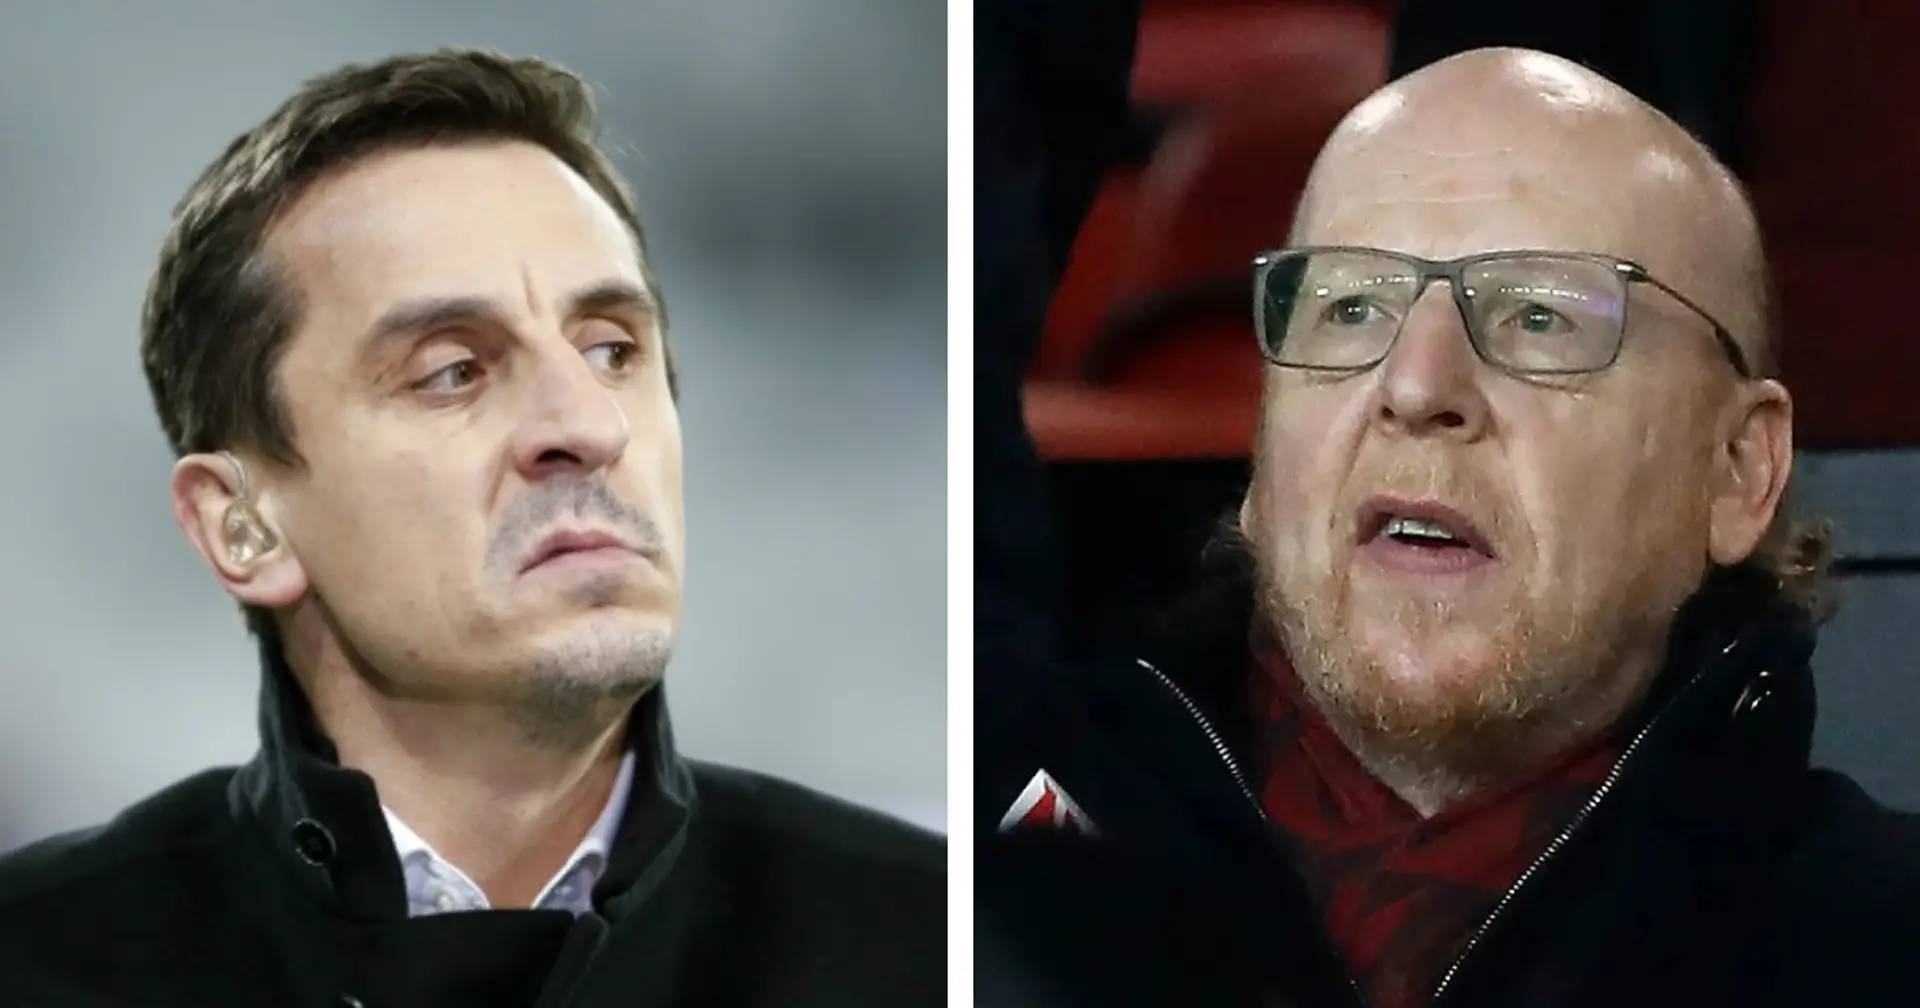 ‘It’s disgraceful’: Neville admits he wanted Man United to get sacked after Super League debacle